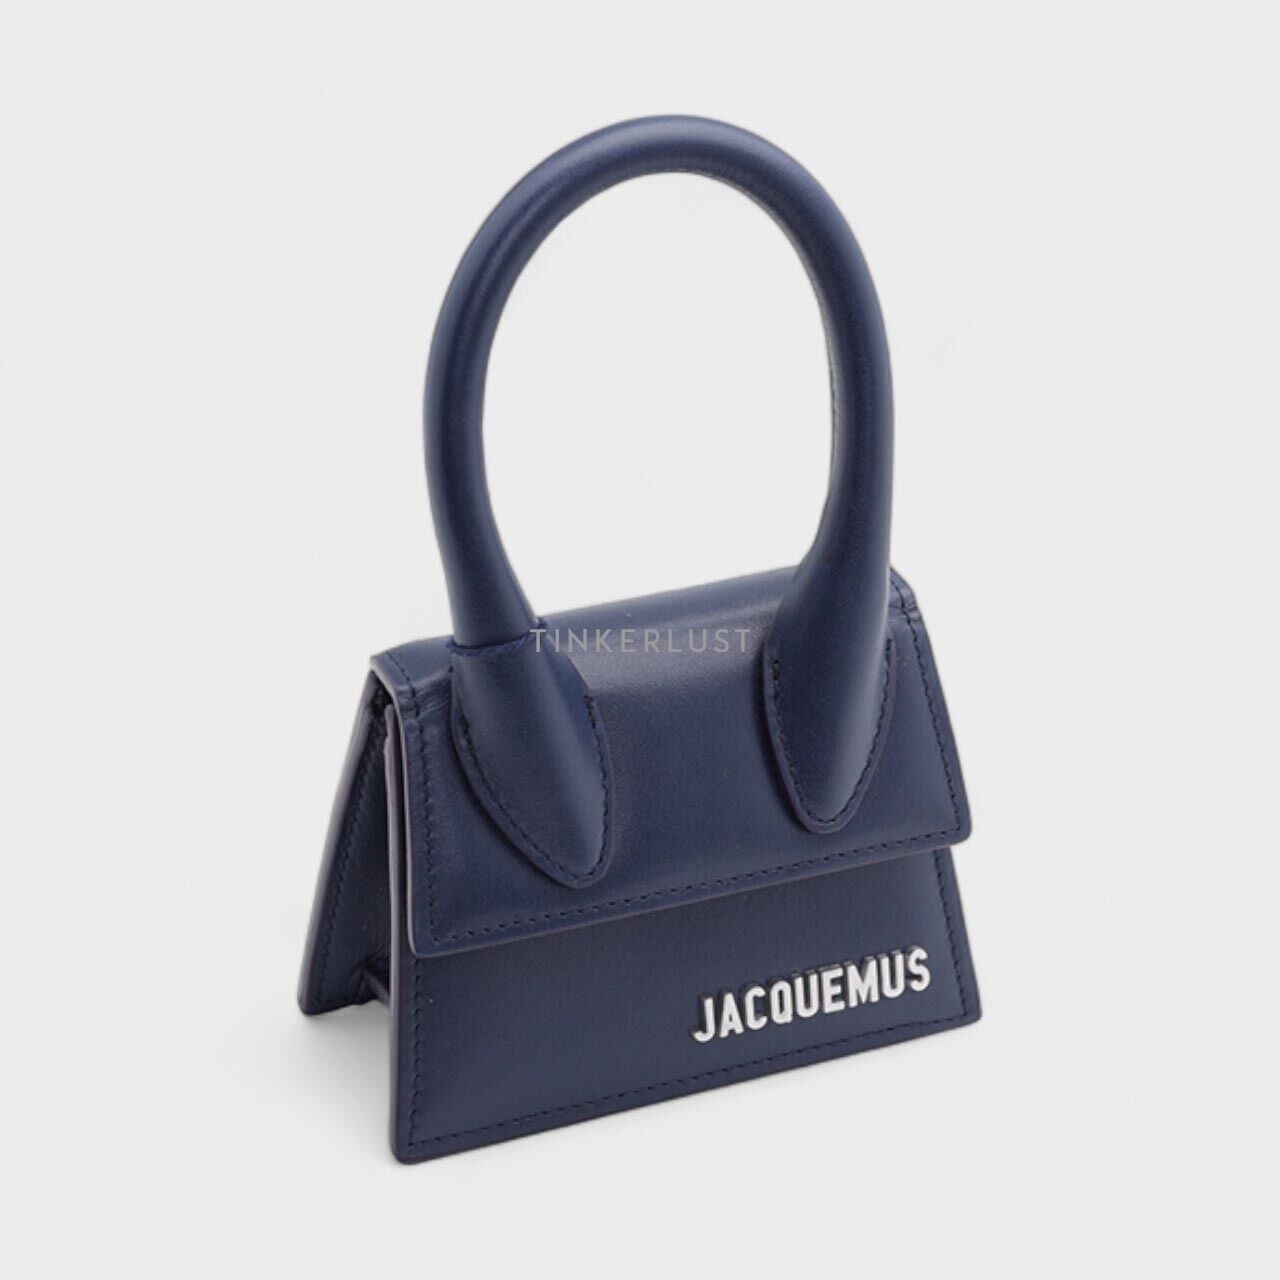 Jacquemus Le Chiquito Homme in Navy with Cotton Strap Shoulder Bag